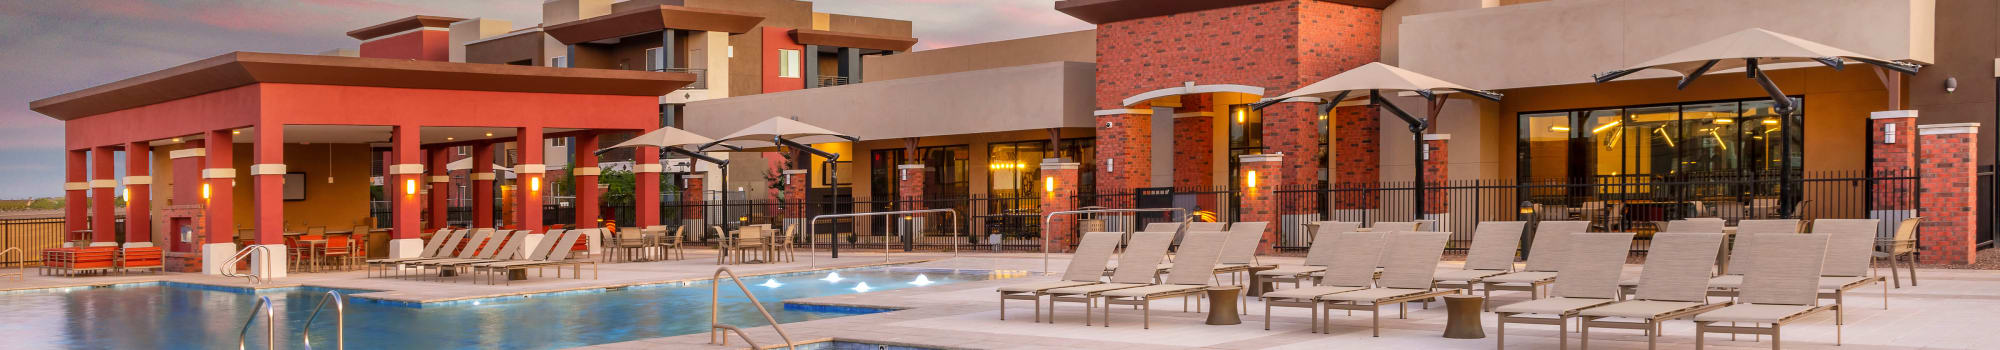 Pet friendly at The Crossing at Cooley Station in Gilbert, Arizona